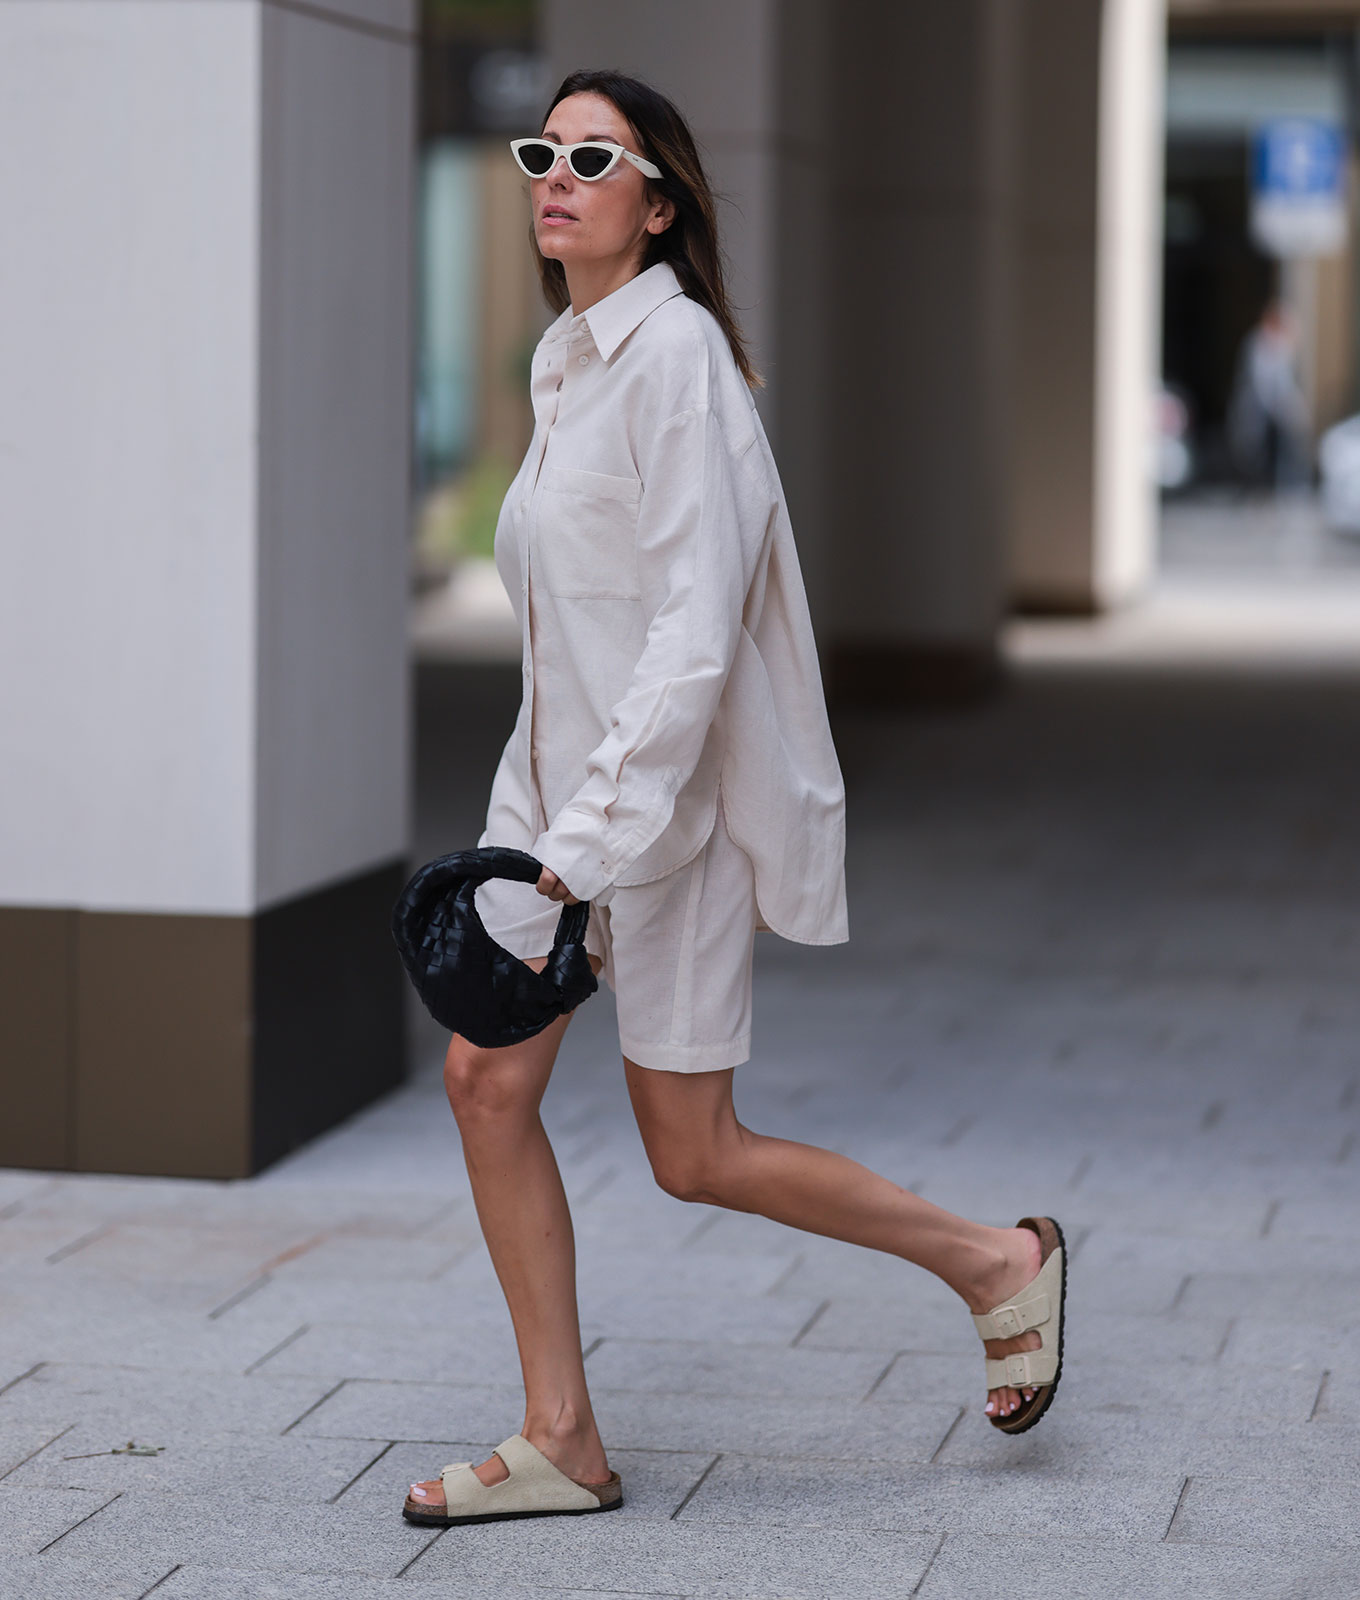 How to Wear Birkenstocks for Maximum Style and Comfort - PureWow